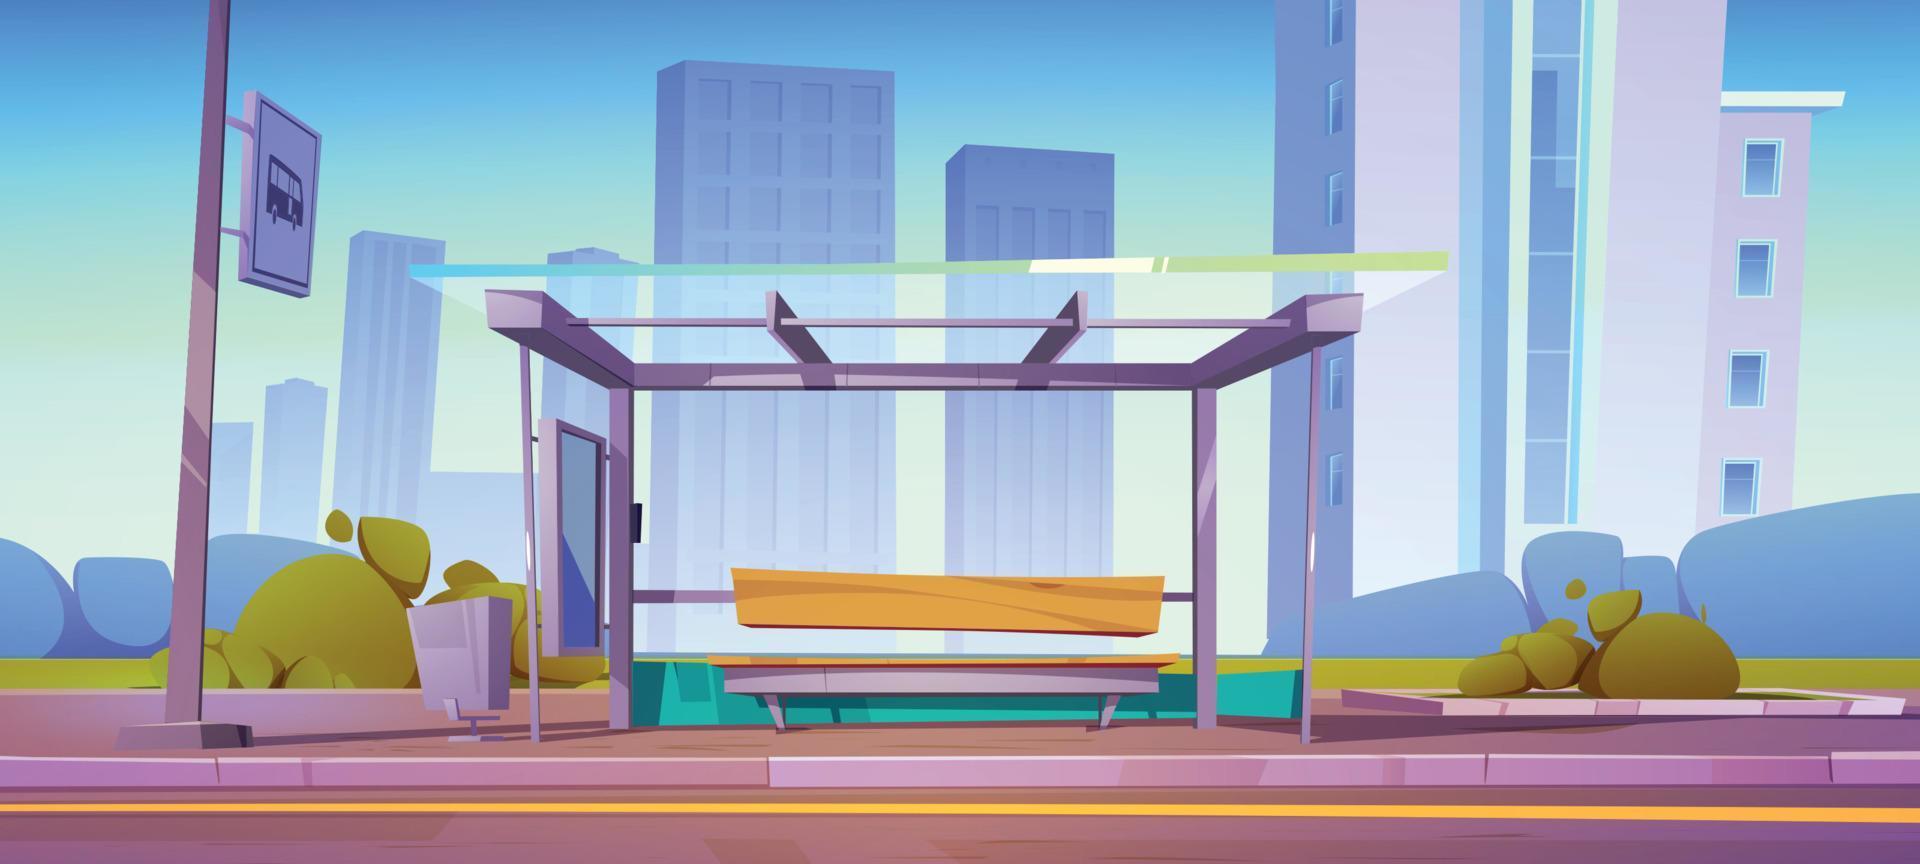 Bus stop, city station for commuter transport vector